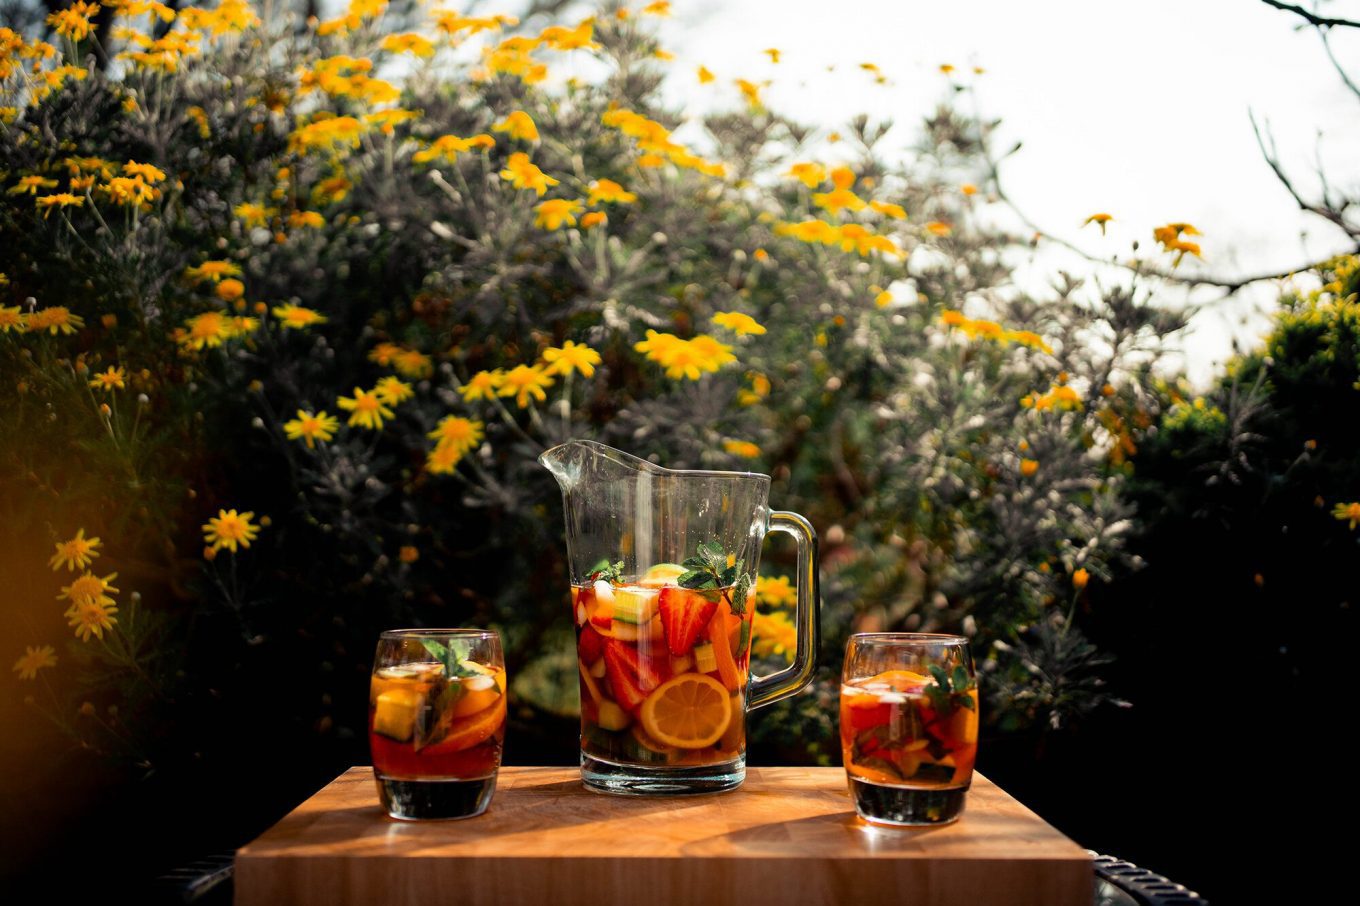 How To Make The Perfect Pitcher Of Pimm’s No.1 Cup | Postcards From Hawaii